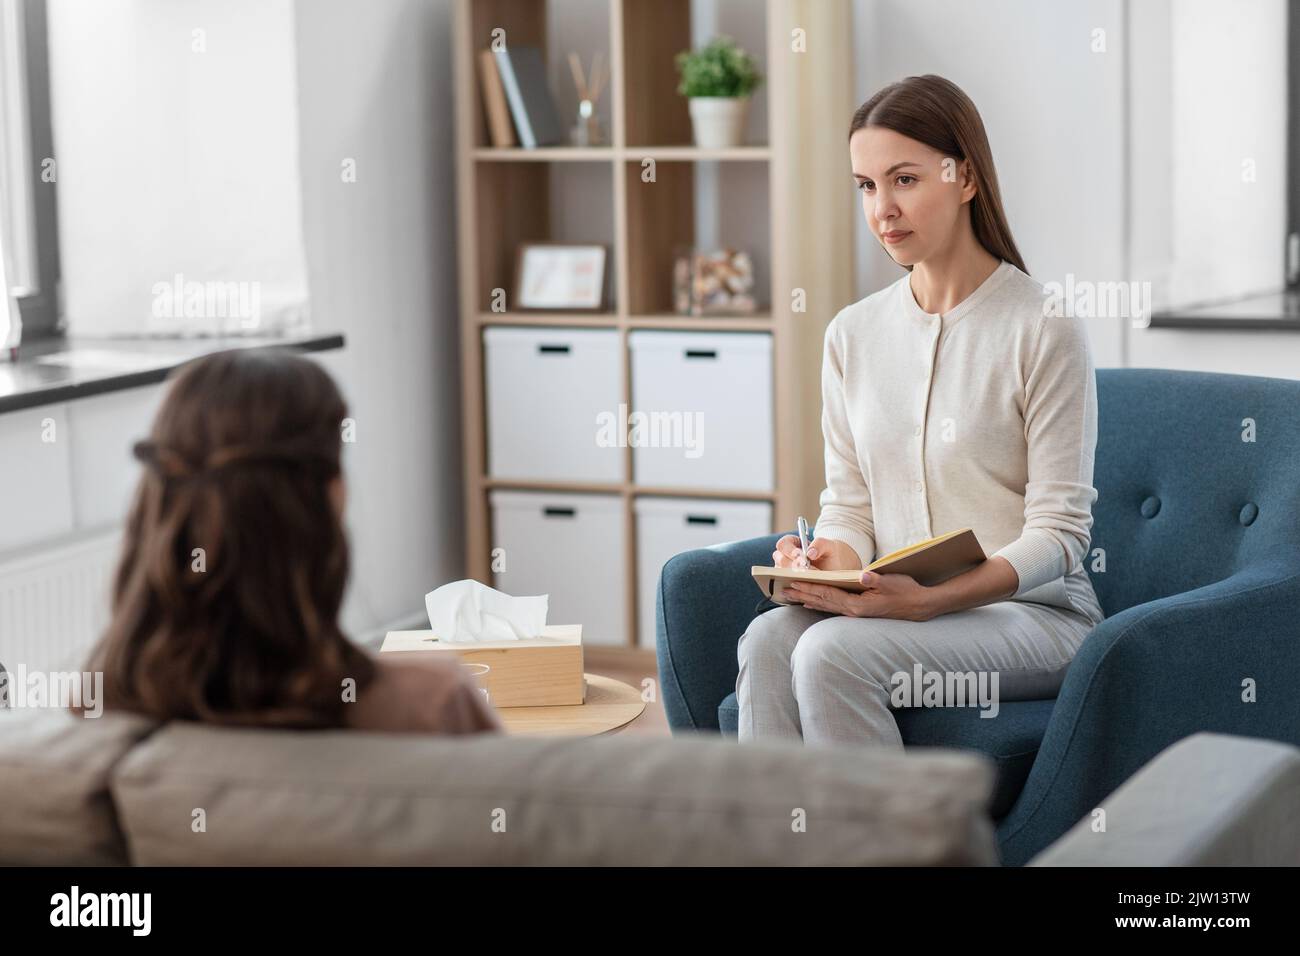 psychologist and woman at psychotherapy session Stock Photo